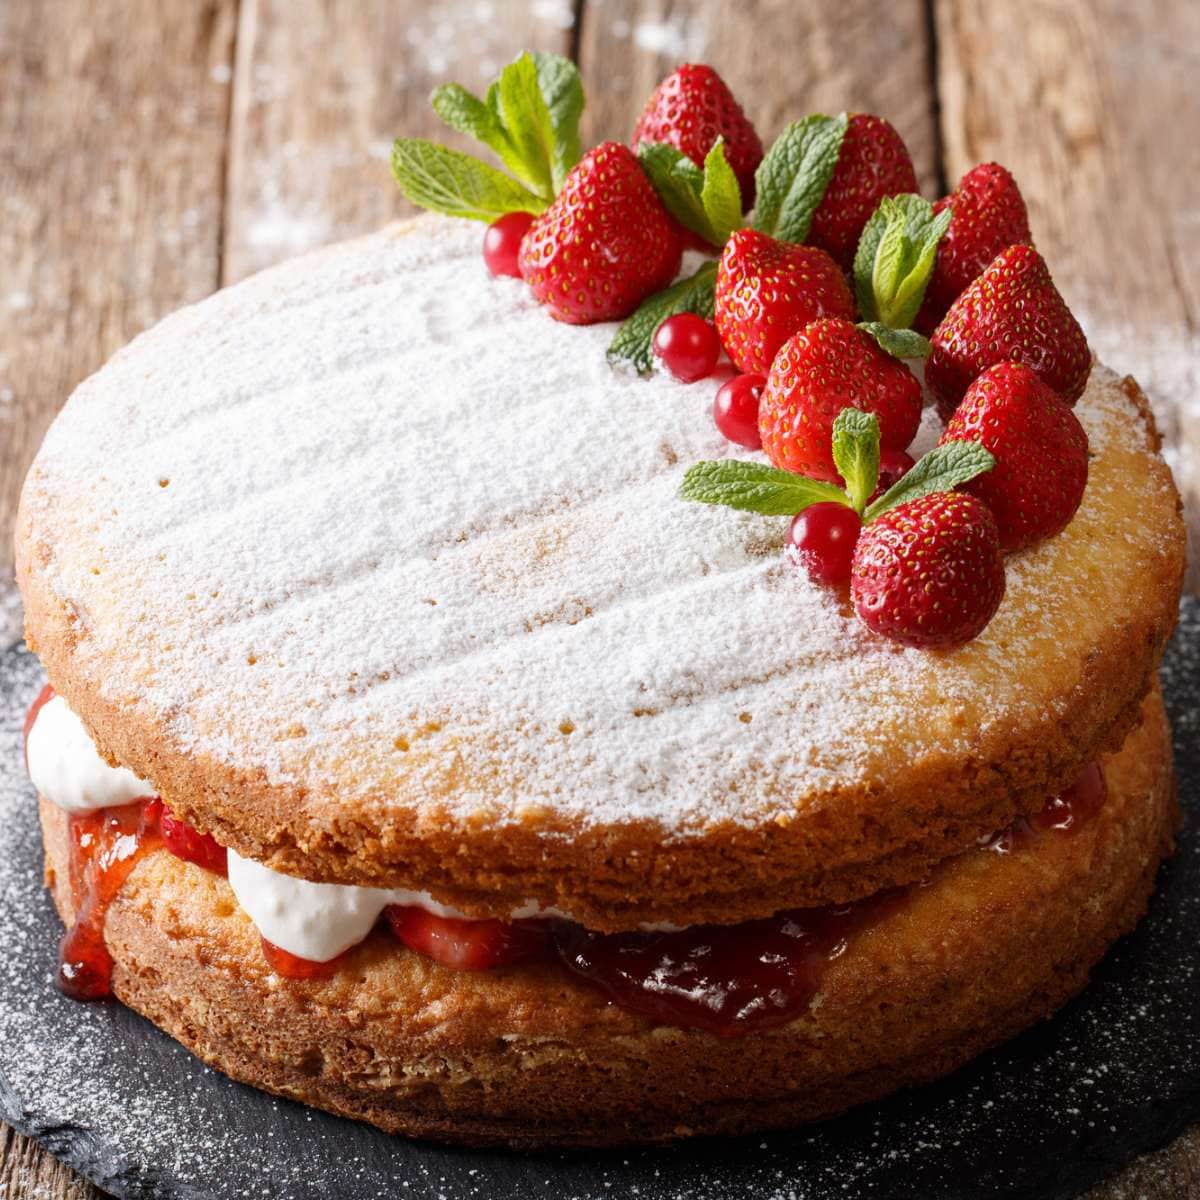 A victoria sponge cake decorated with fresh strawberries.